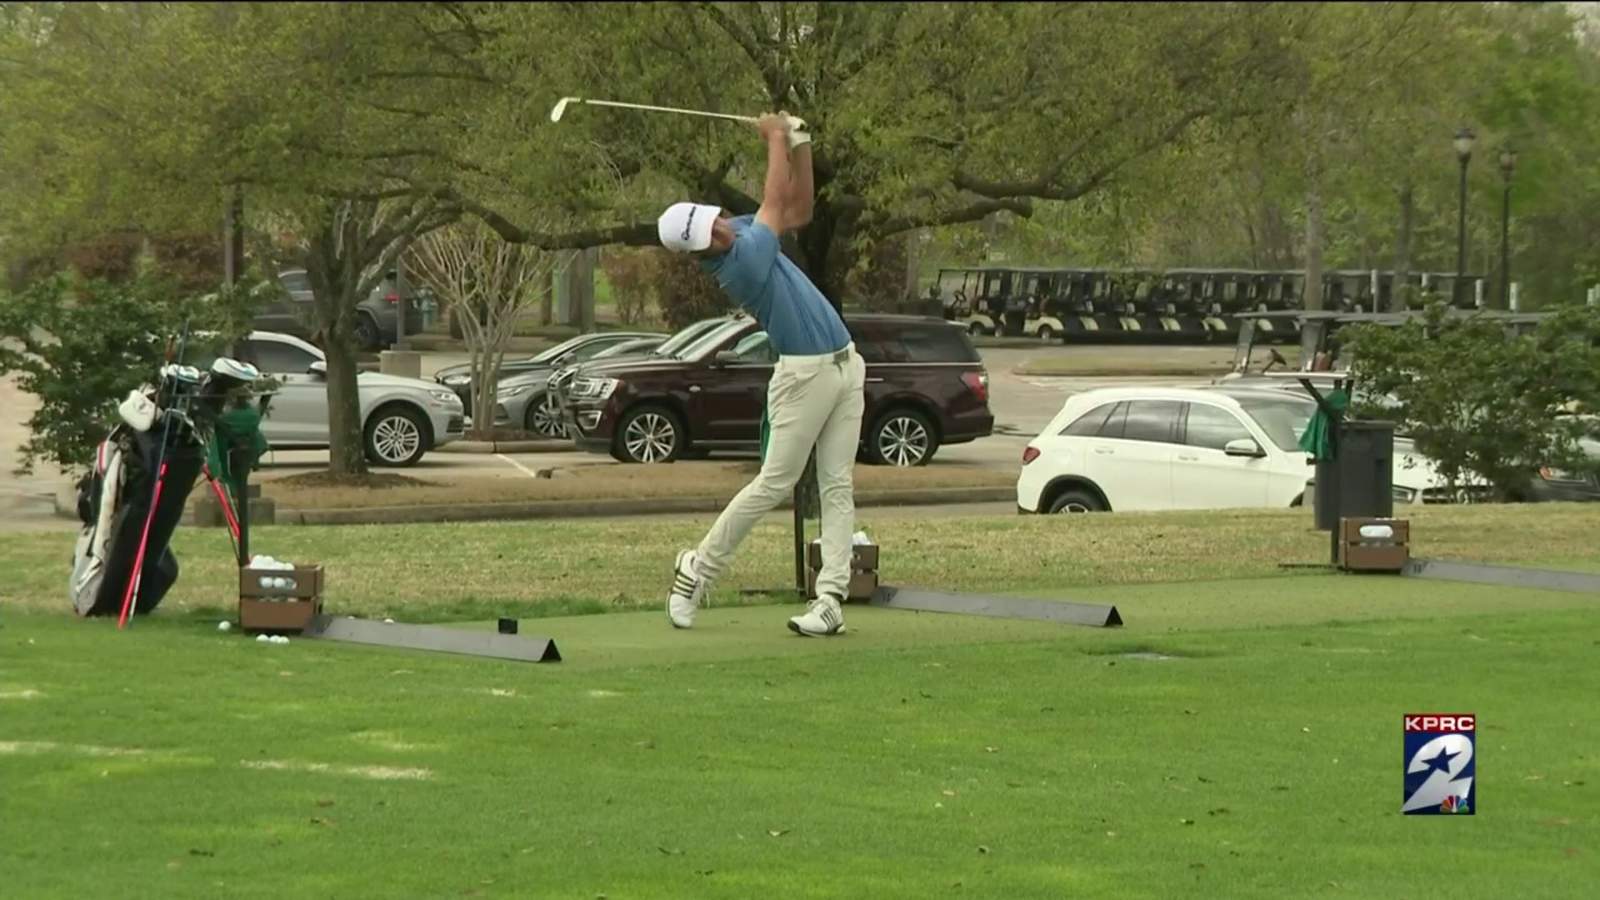 Jaivier’s summit: How one 16-year-old Houston golfer is climbing his way to the top